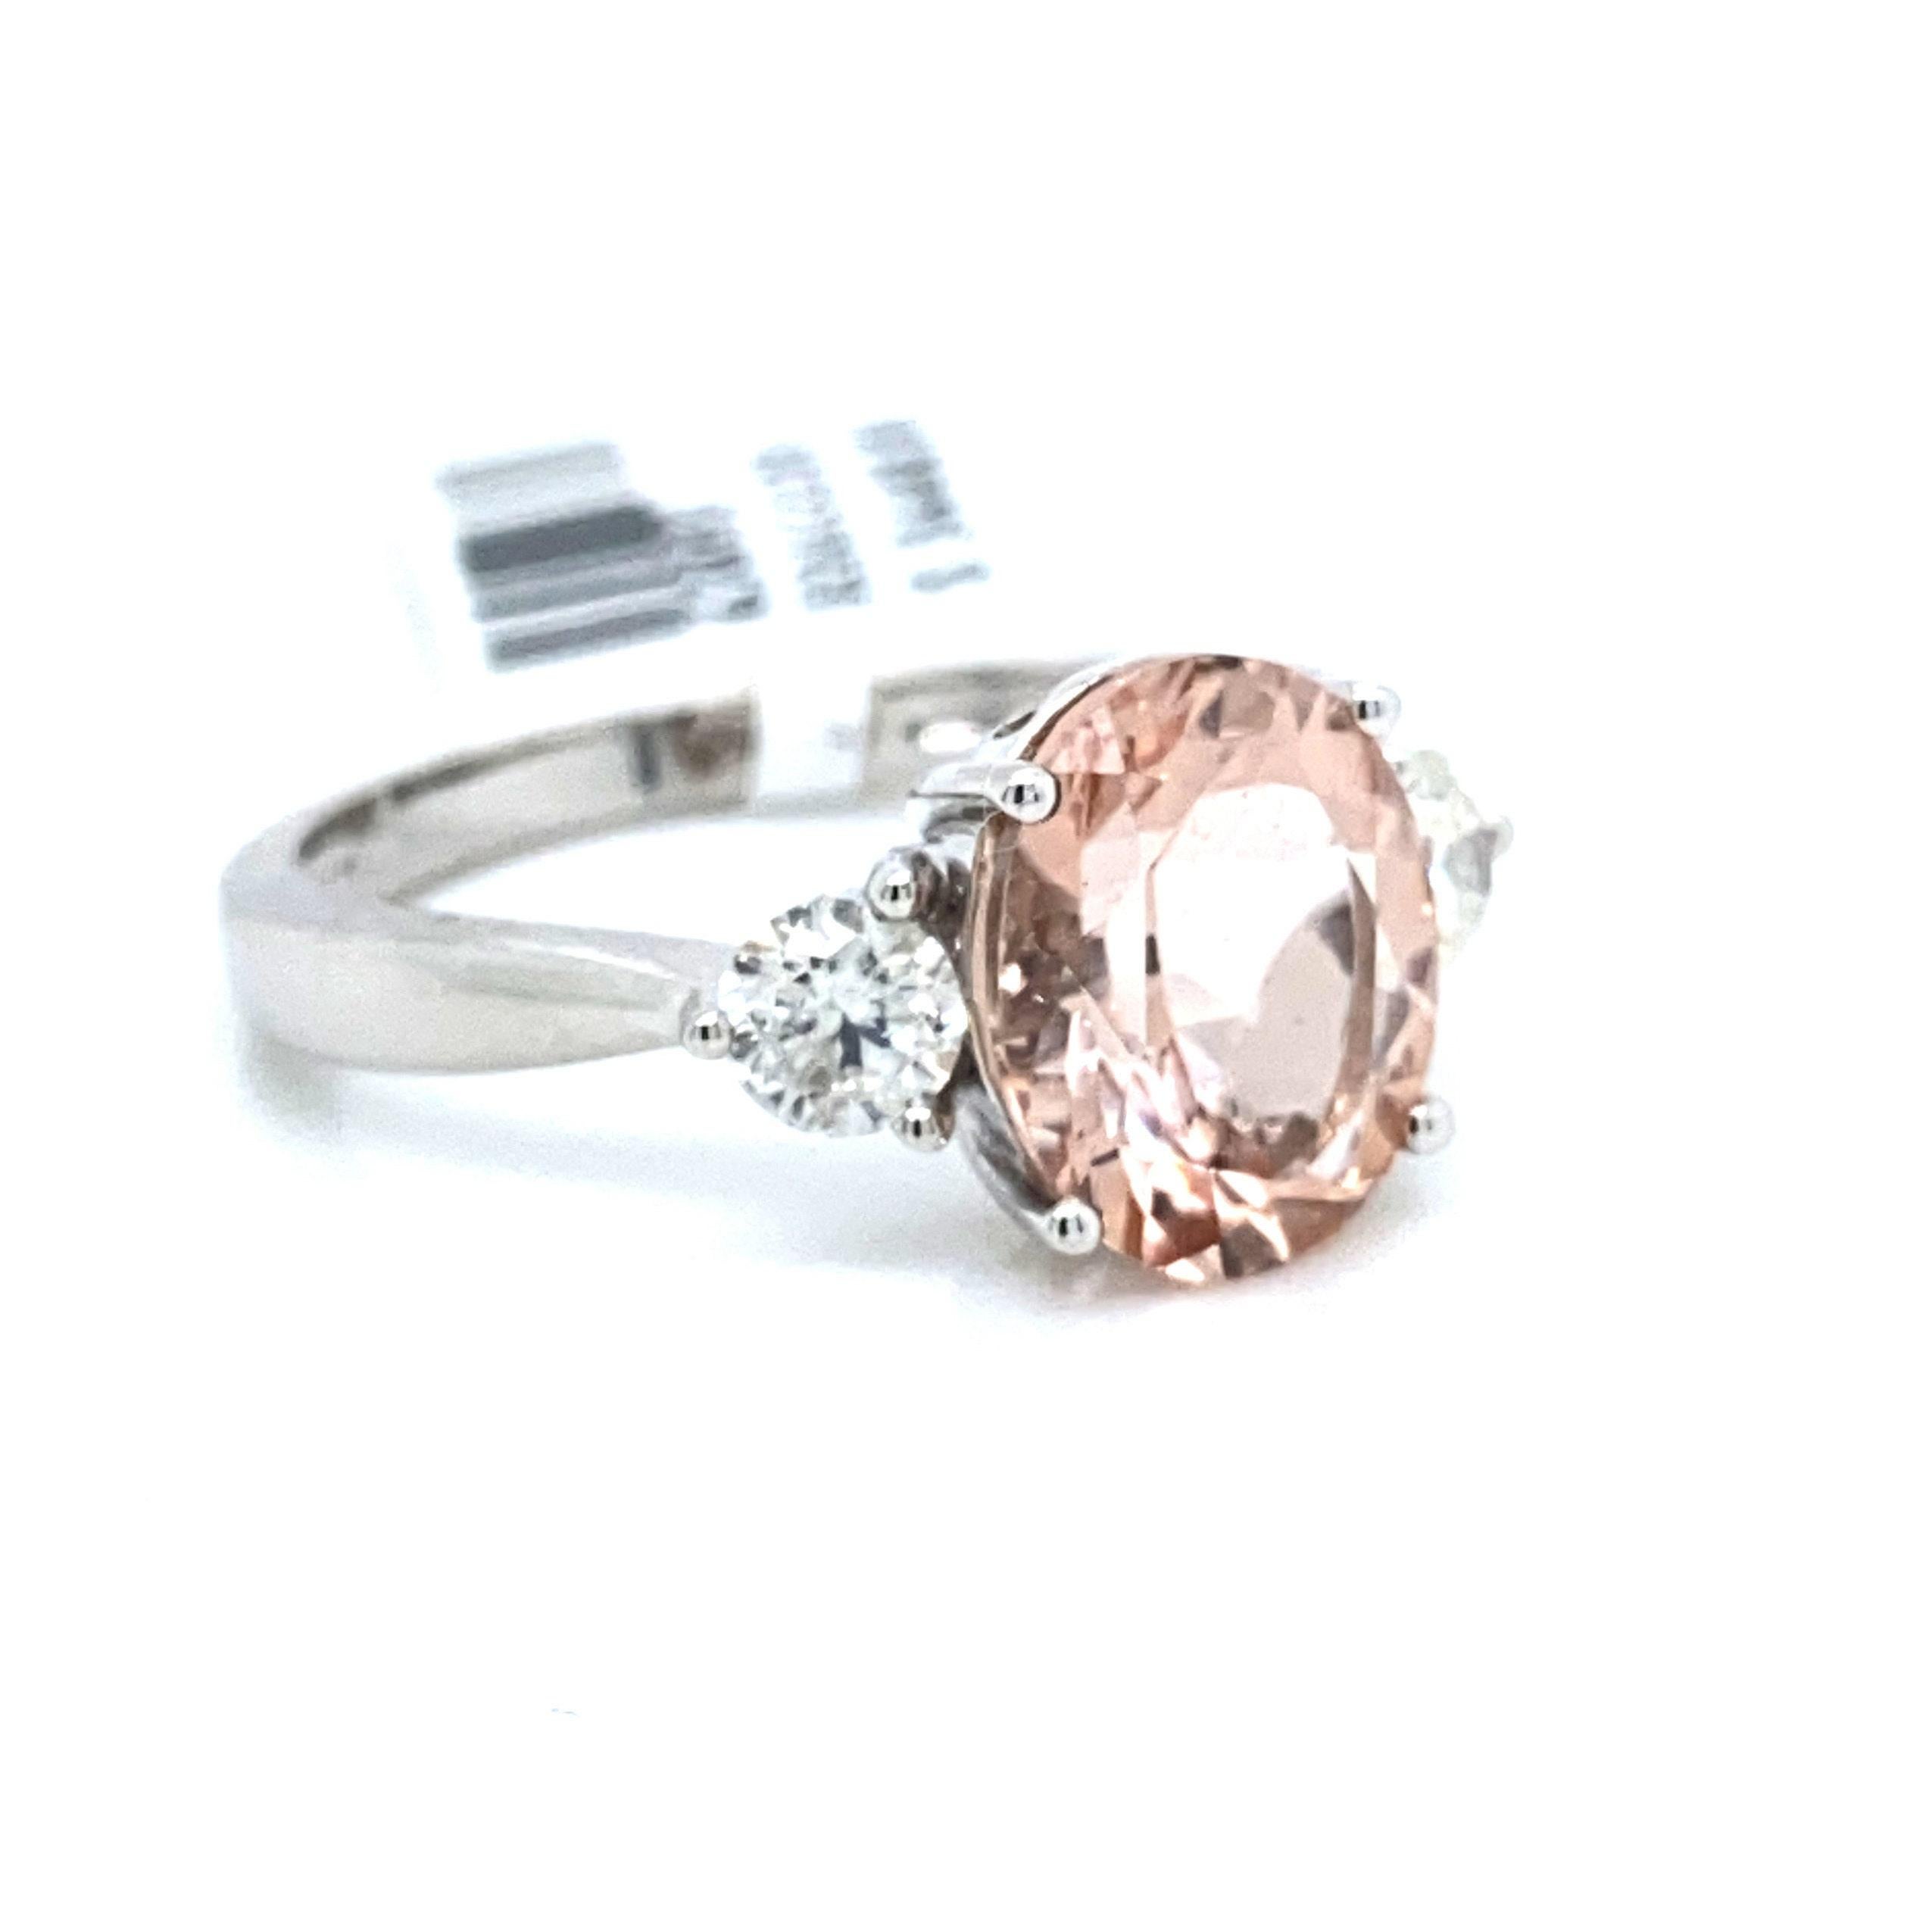 This is a majestic three stone morganite and diamond ring set in solid 14K white gold. The natural 3.36 Ct Morganite oval has an excellent peachy pink color and is complemented by a vivid diamond on each side. The ring is stamped 14K and is a true